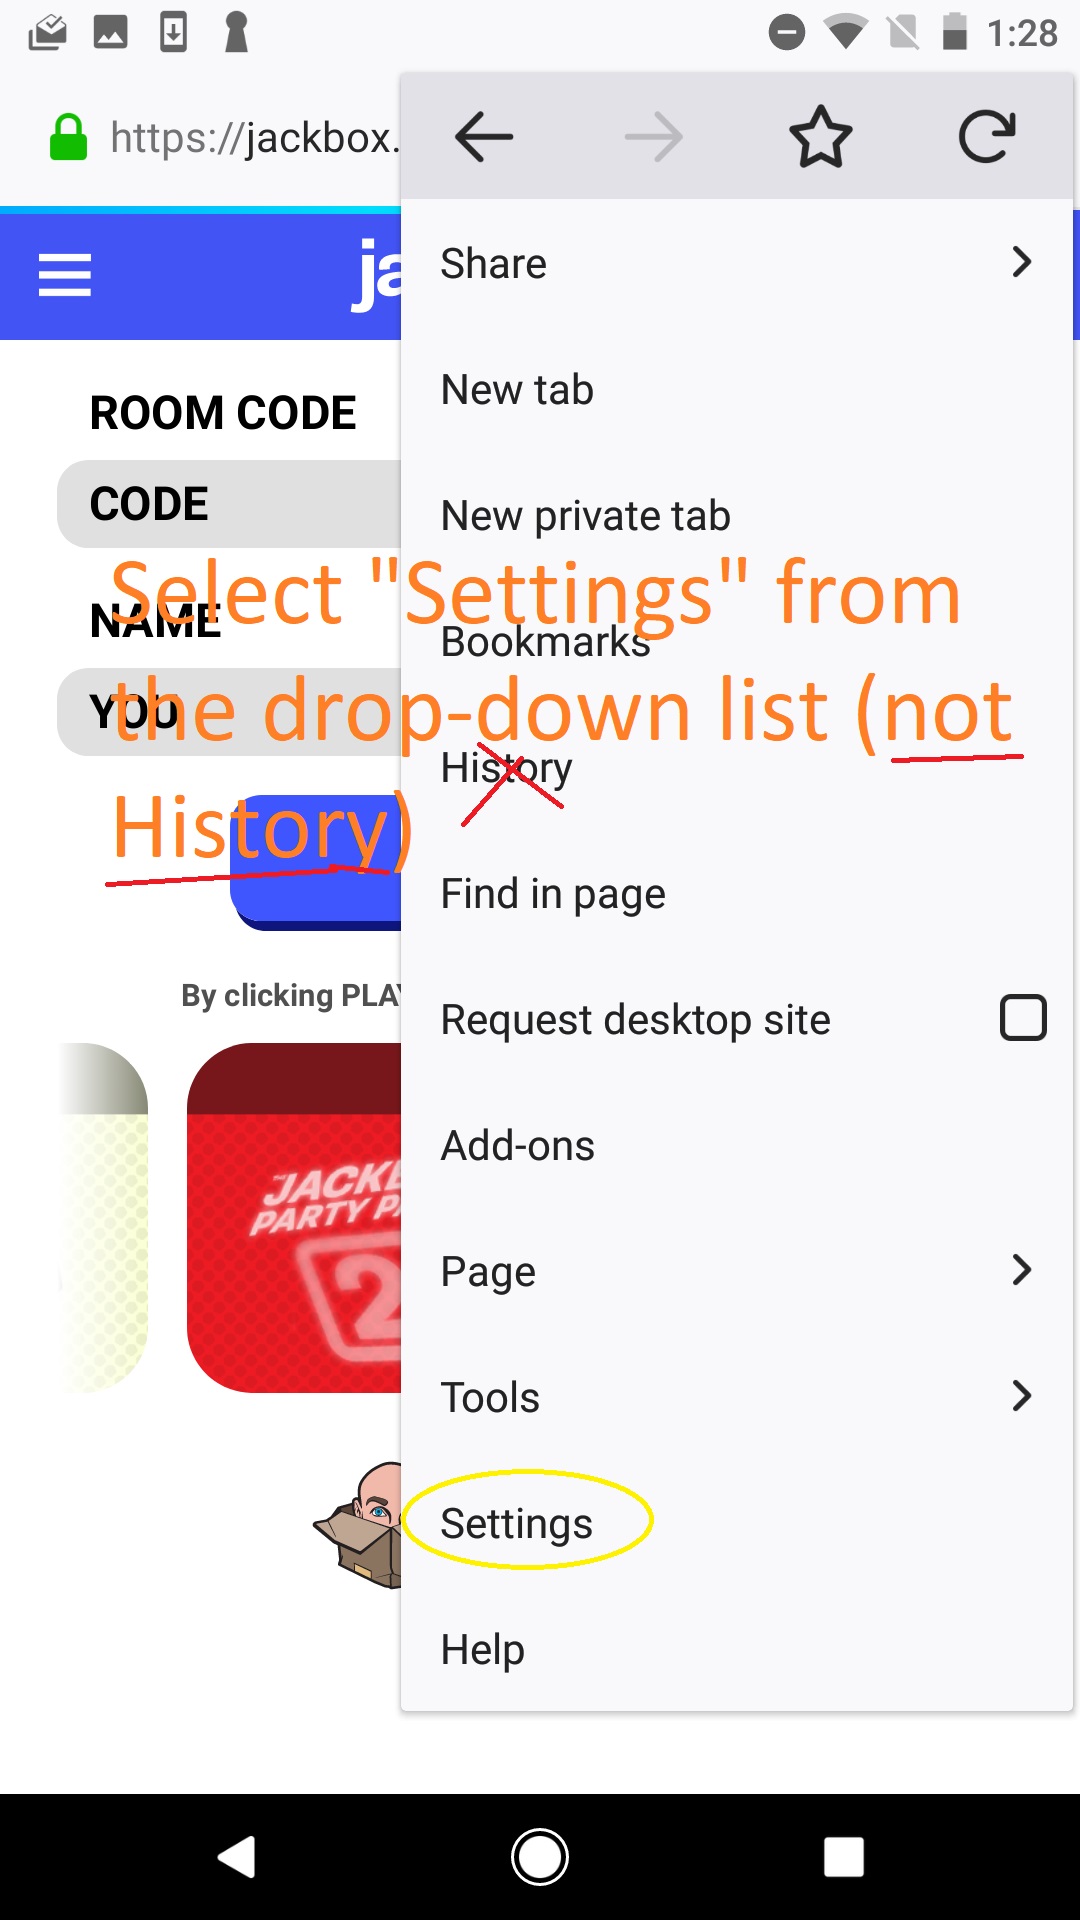 Drop down menu. Text: select Settings, not History, from the list. Settings is the second from bottom, above Help.